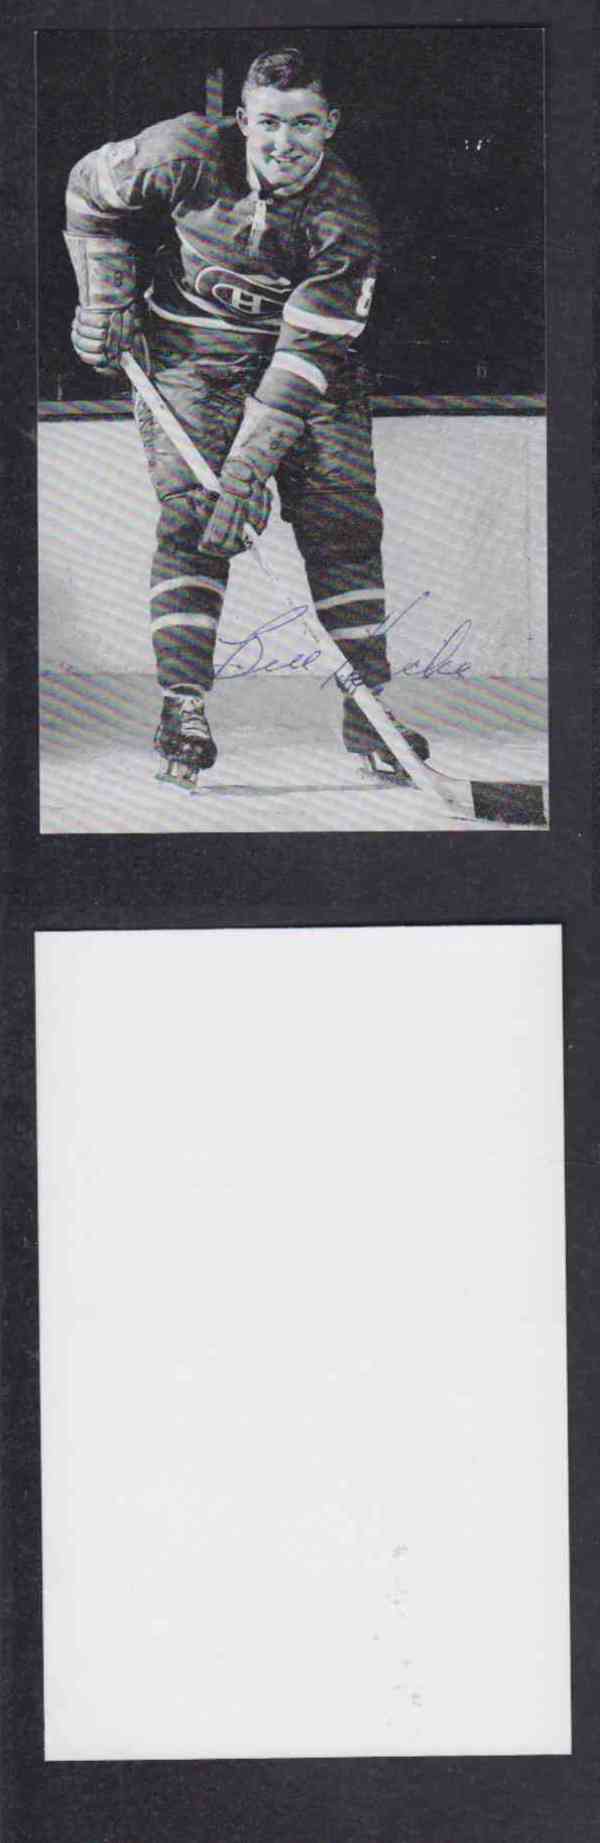 1960 'S MONTREAL CANADIENS B.HICKE  AUTOGRAPHED POST CARD  photo